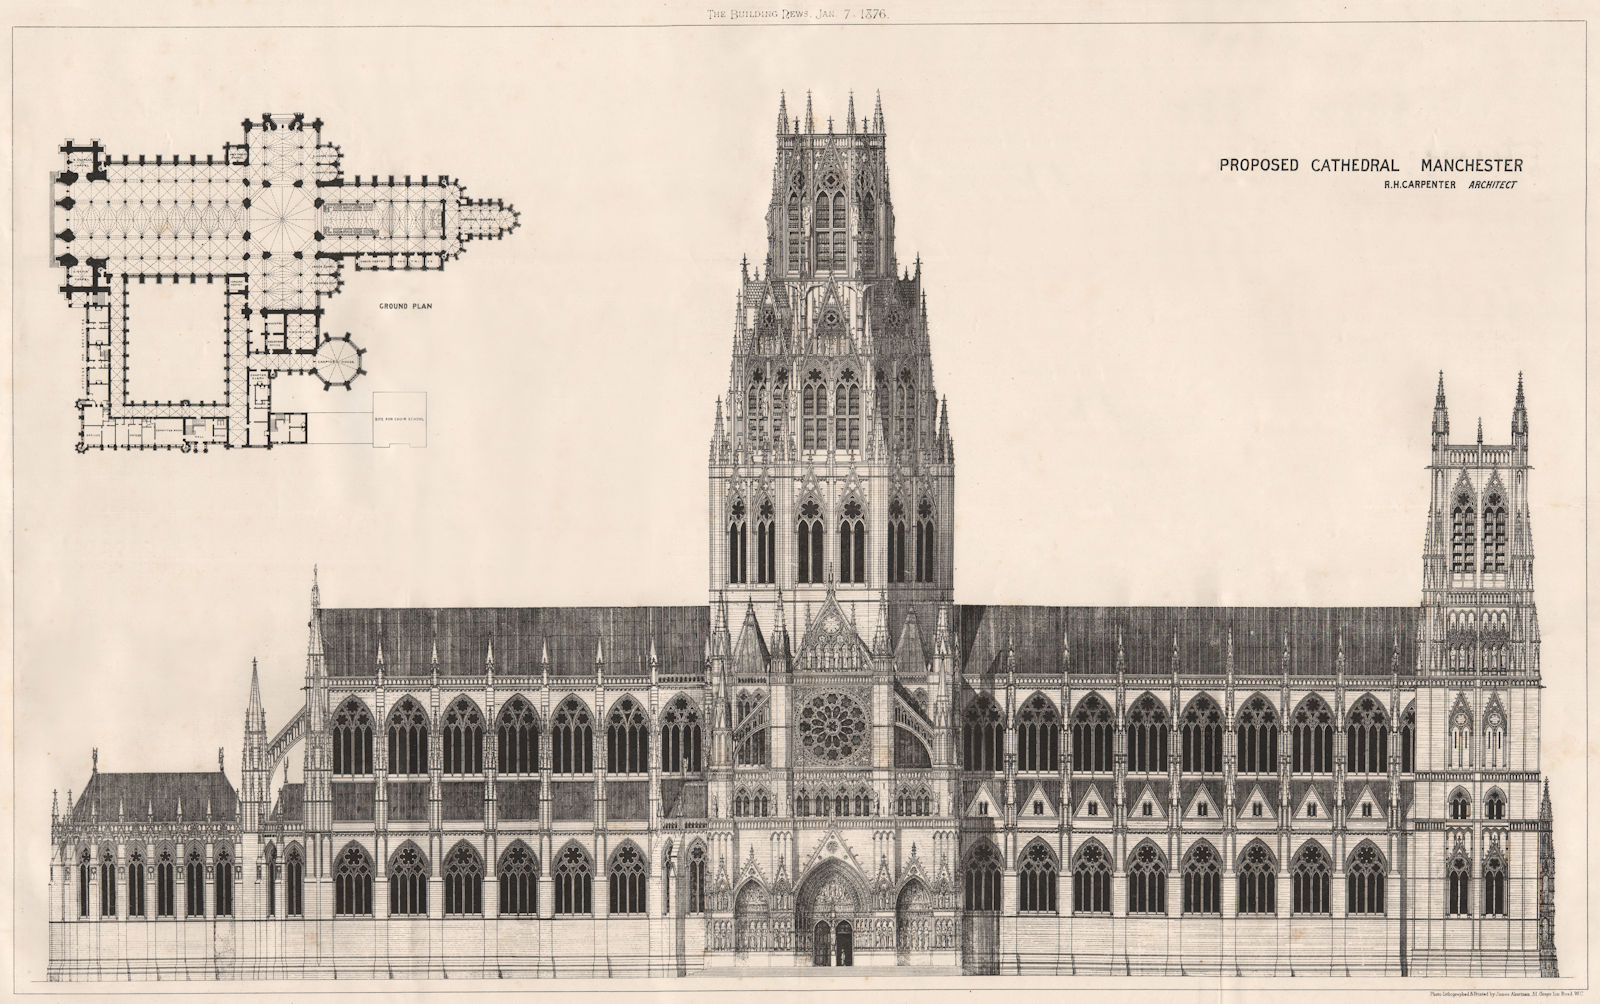 Proposed cathedral, Manchester; R.H. Carpenter, Architect 1876 old print